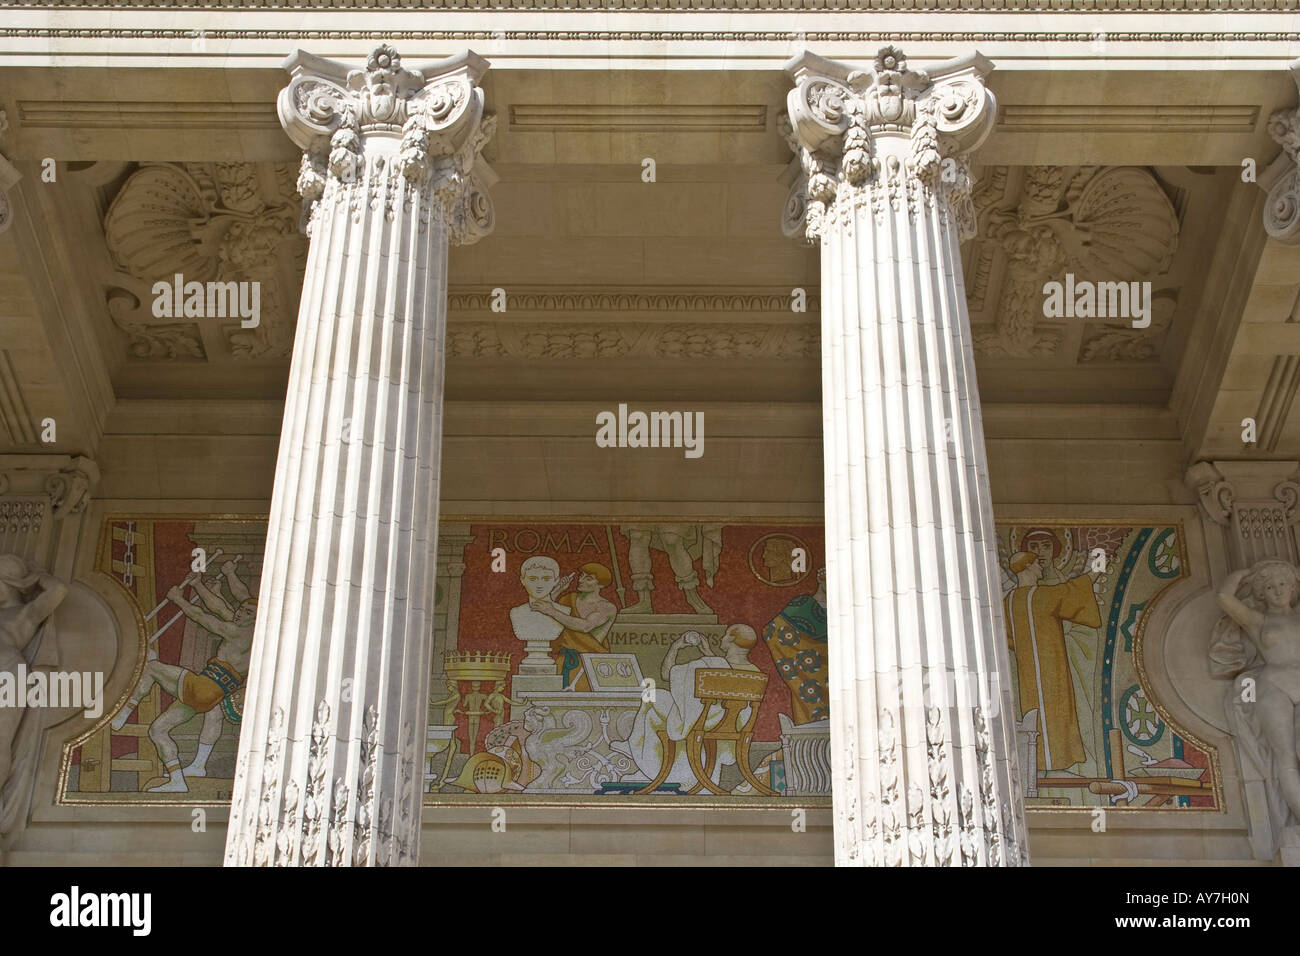 A mosaic which runs along the facade of the Grand Palais shows the different steps in the history of art. Stock Photo